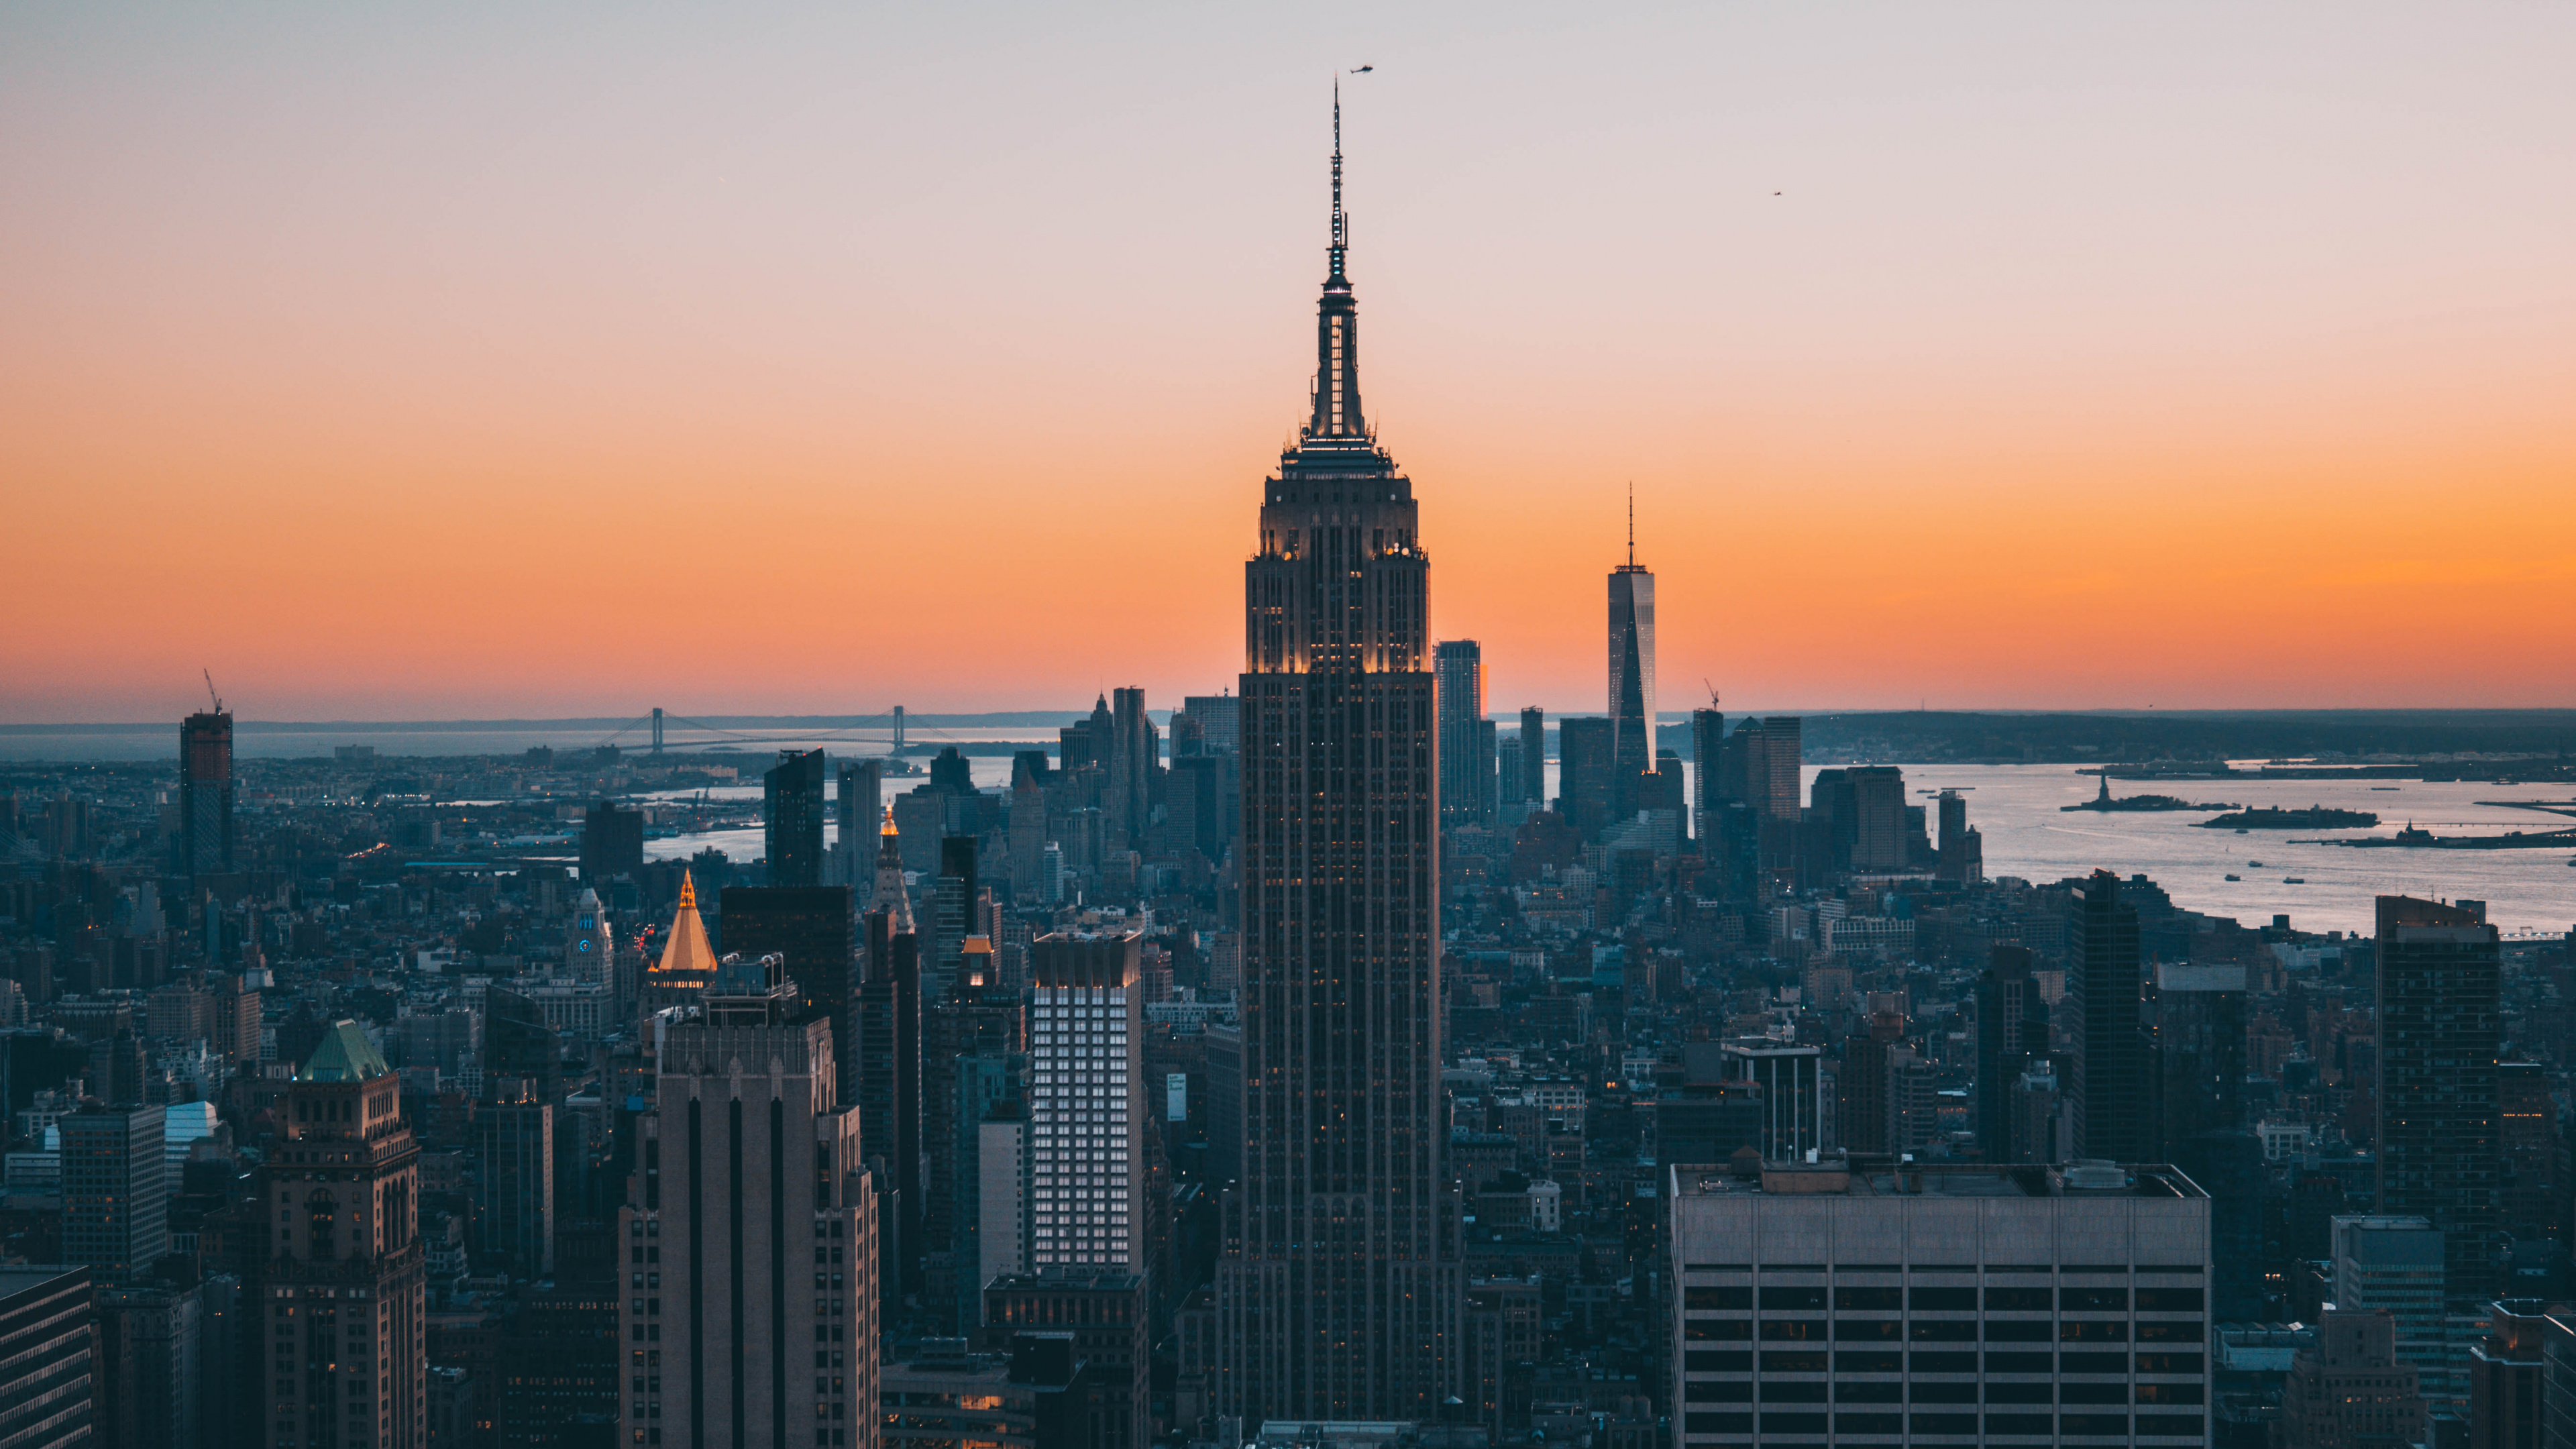 Wallpaper Empire State Building, Sunset, Skyscrapers, - New York City - HD Wallpaper 